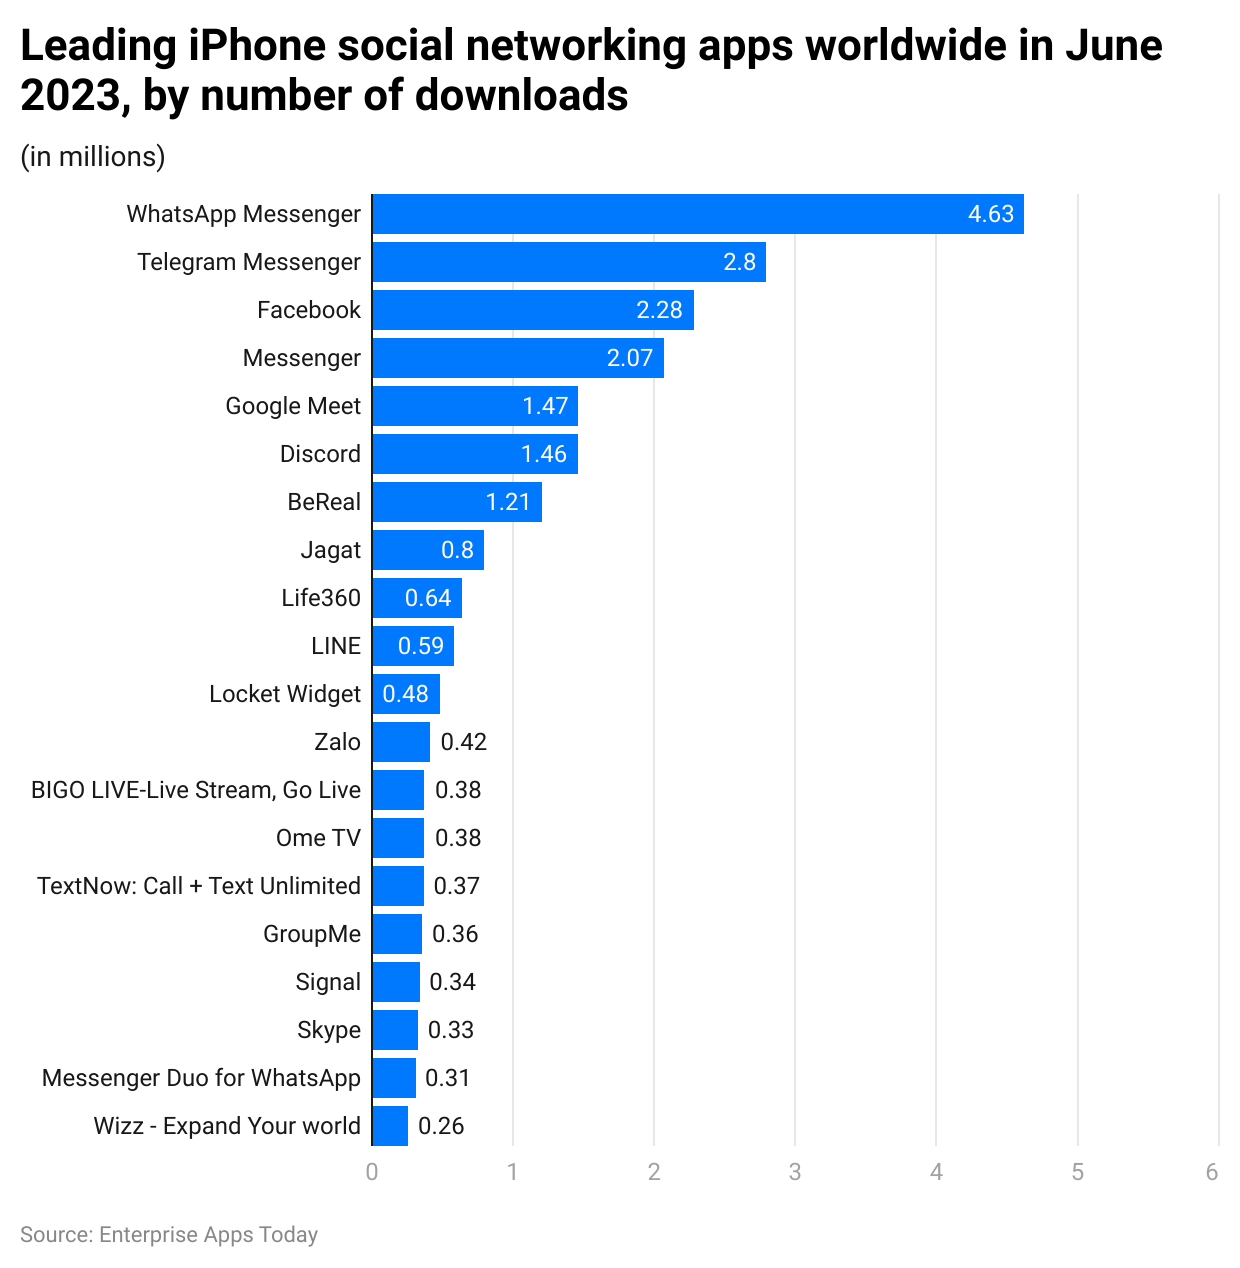 leading-iphone-social-networking-apps-worldwide-in-june-2023-by-number-of-downloads